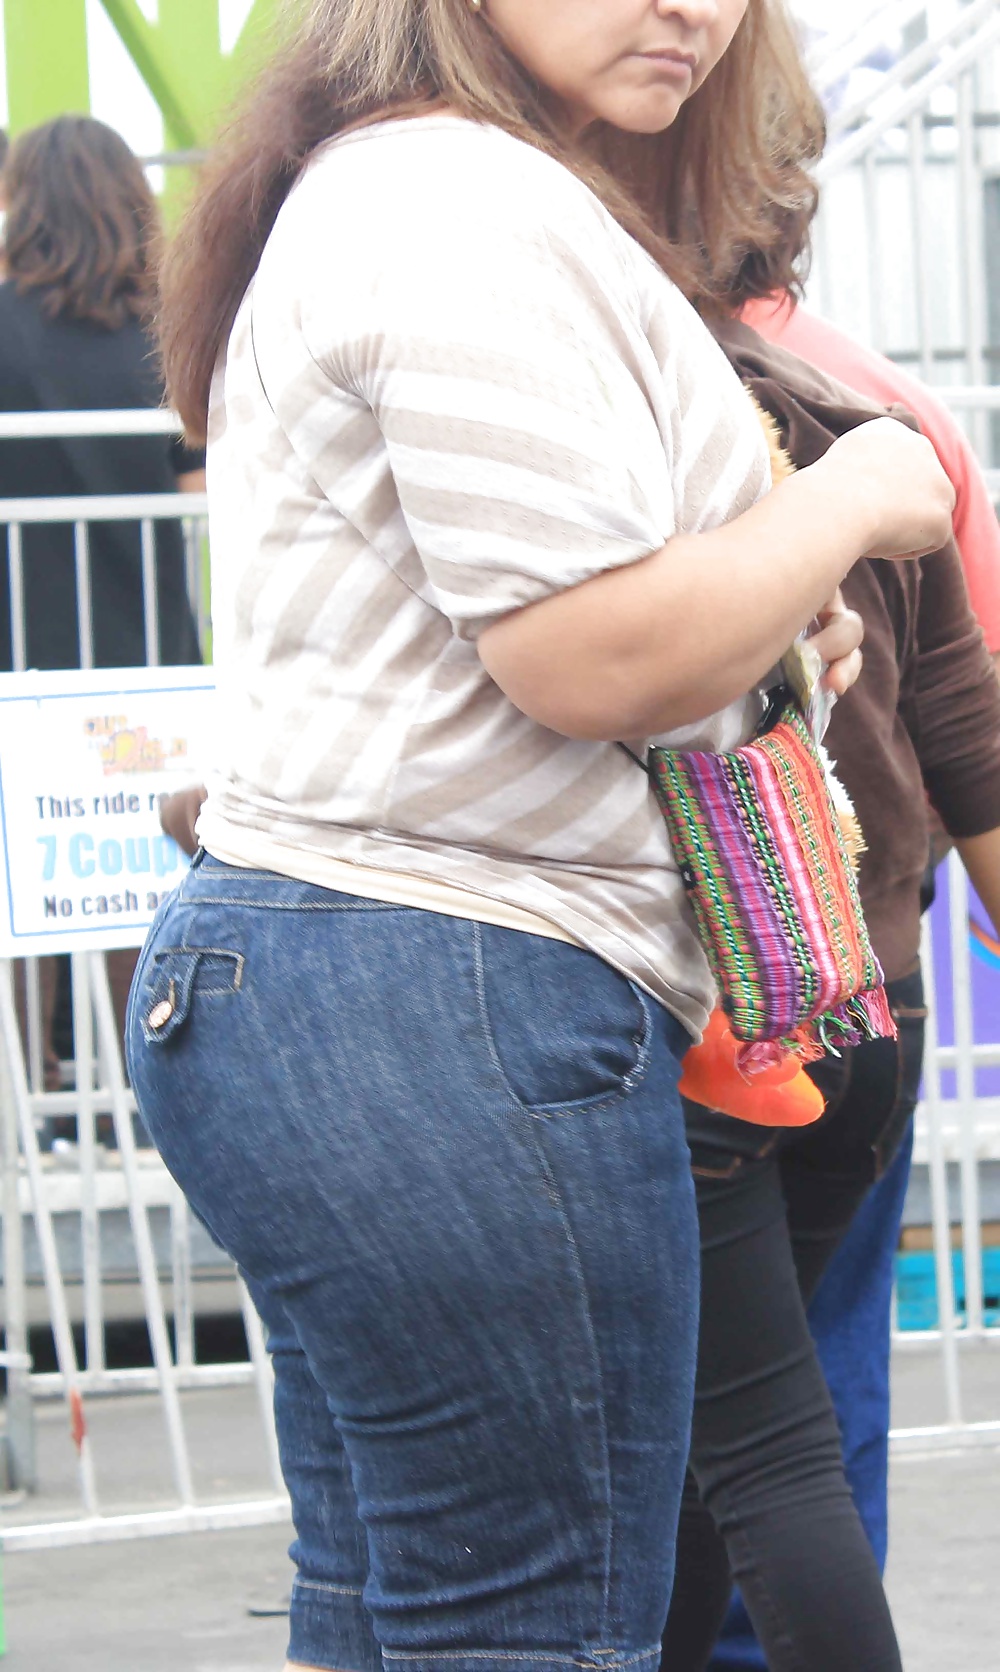 Candid Huge Latina Mom Ass in Jeans #31359613